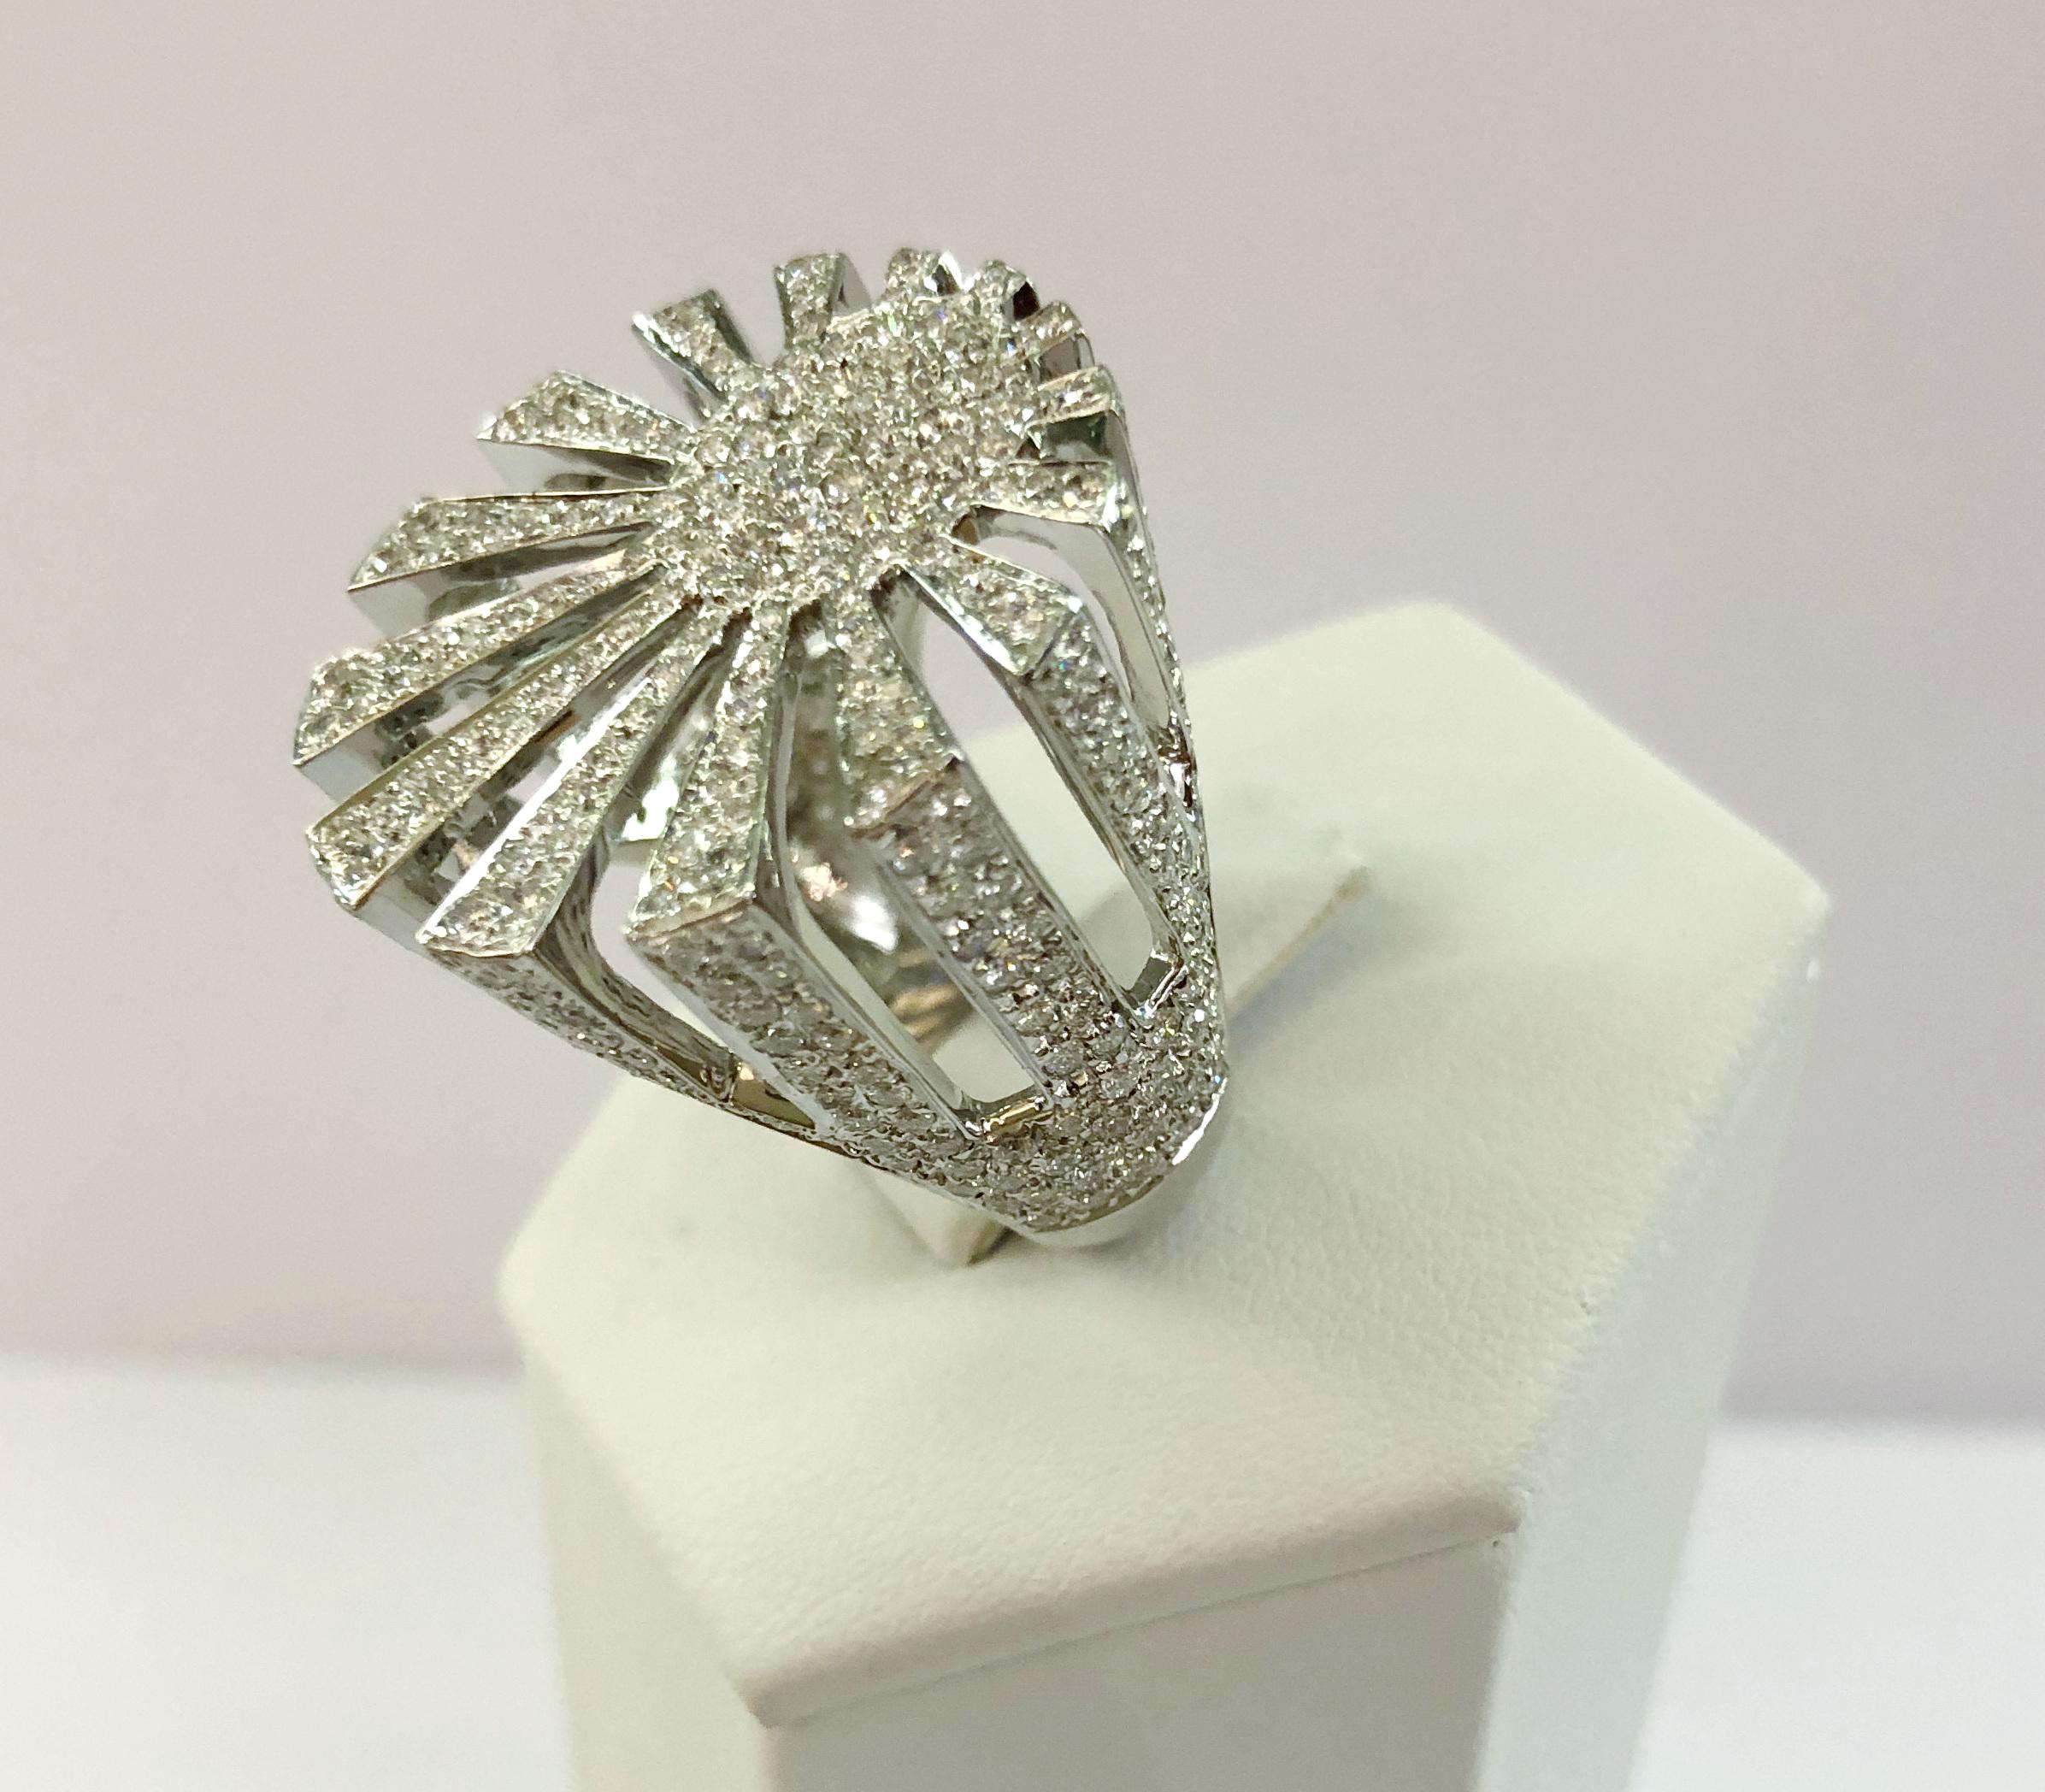 Vintage 18 karat white gold cocktail ring, with brilliant diamonds forming the shape of a sunburst, Italy 1970-1980s
Ring size US 7